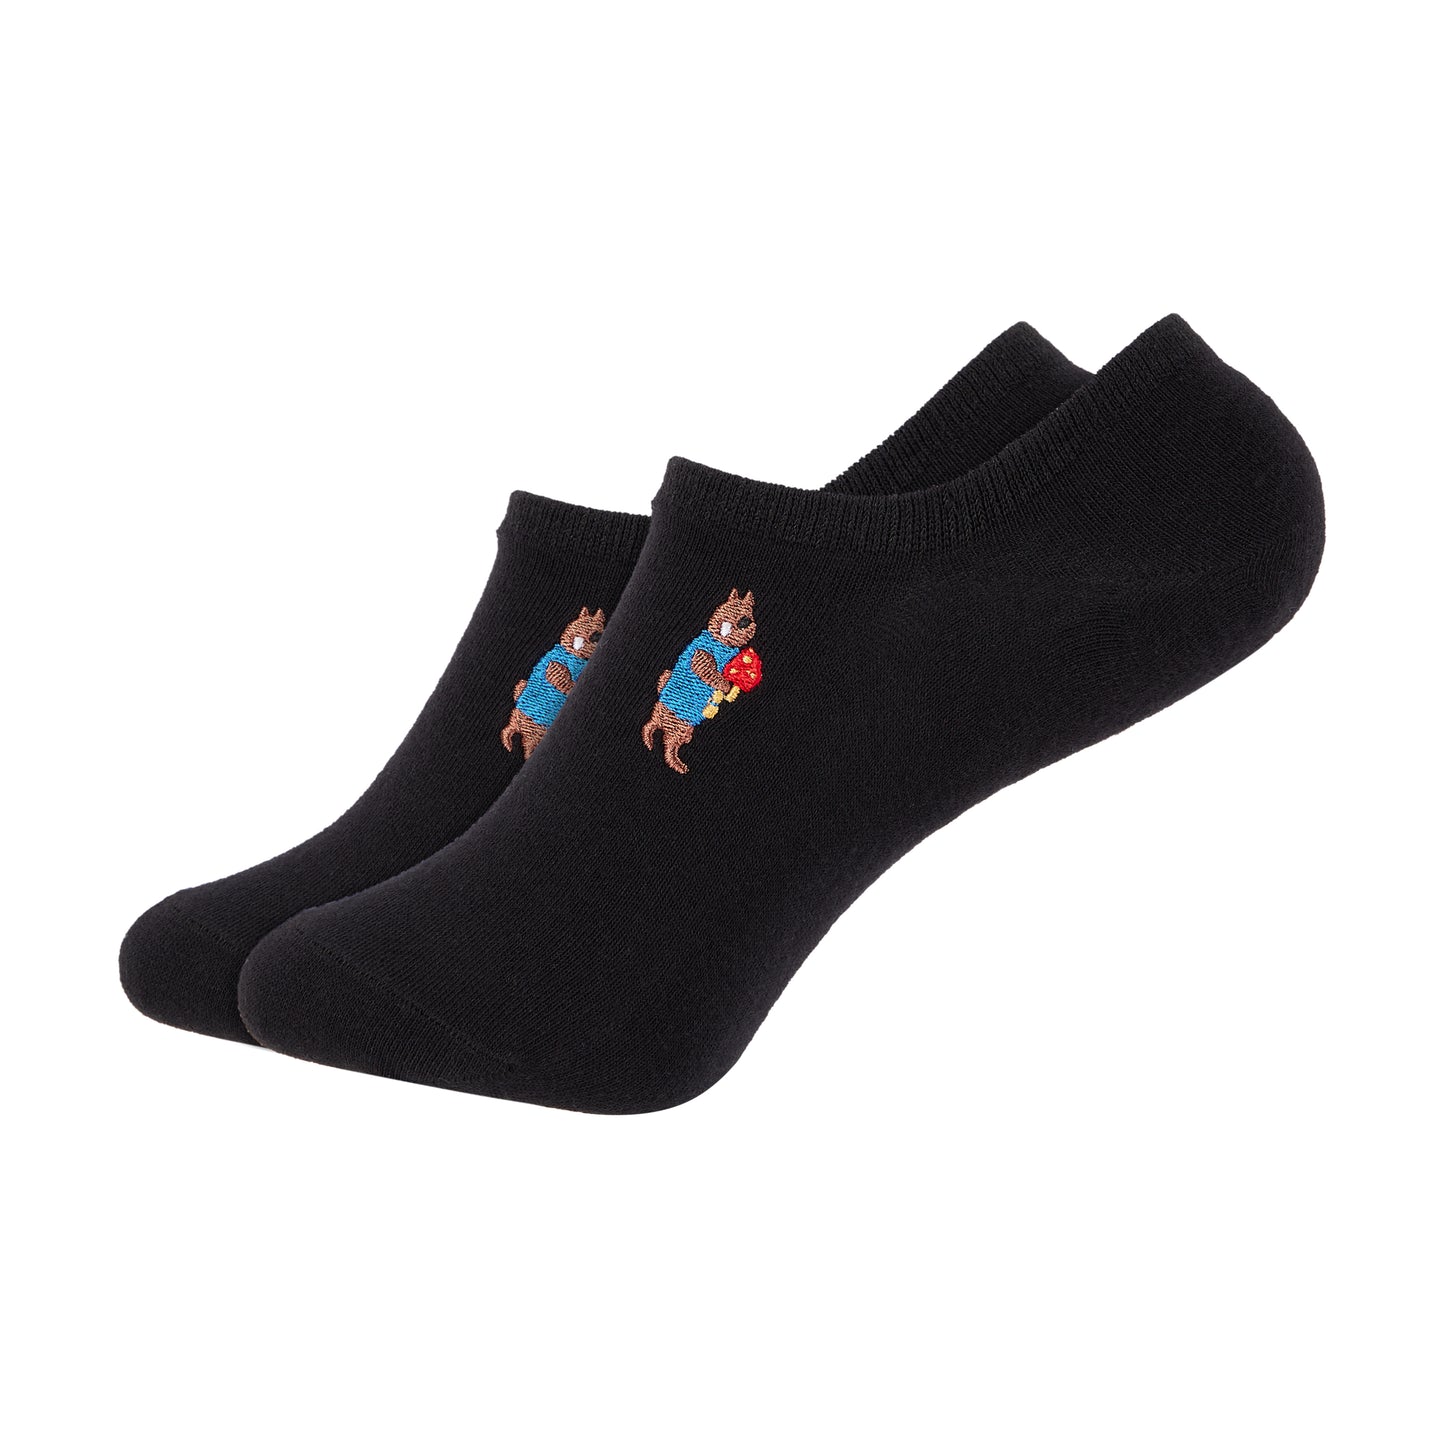 Women's Colored Plain Invisible Foot Socks with Animal Patch - IDENTITY Apparel Shop